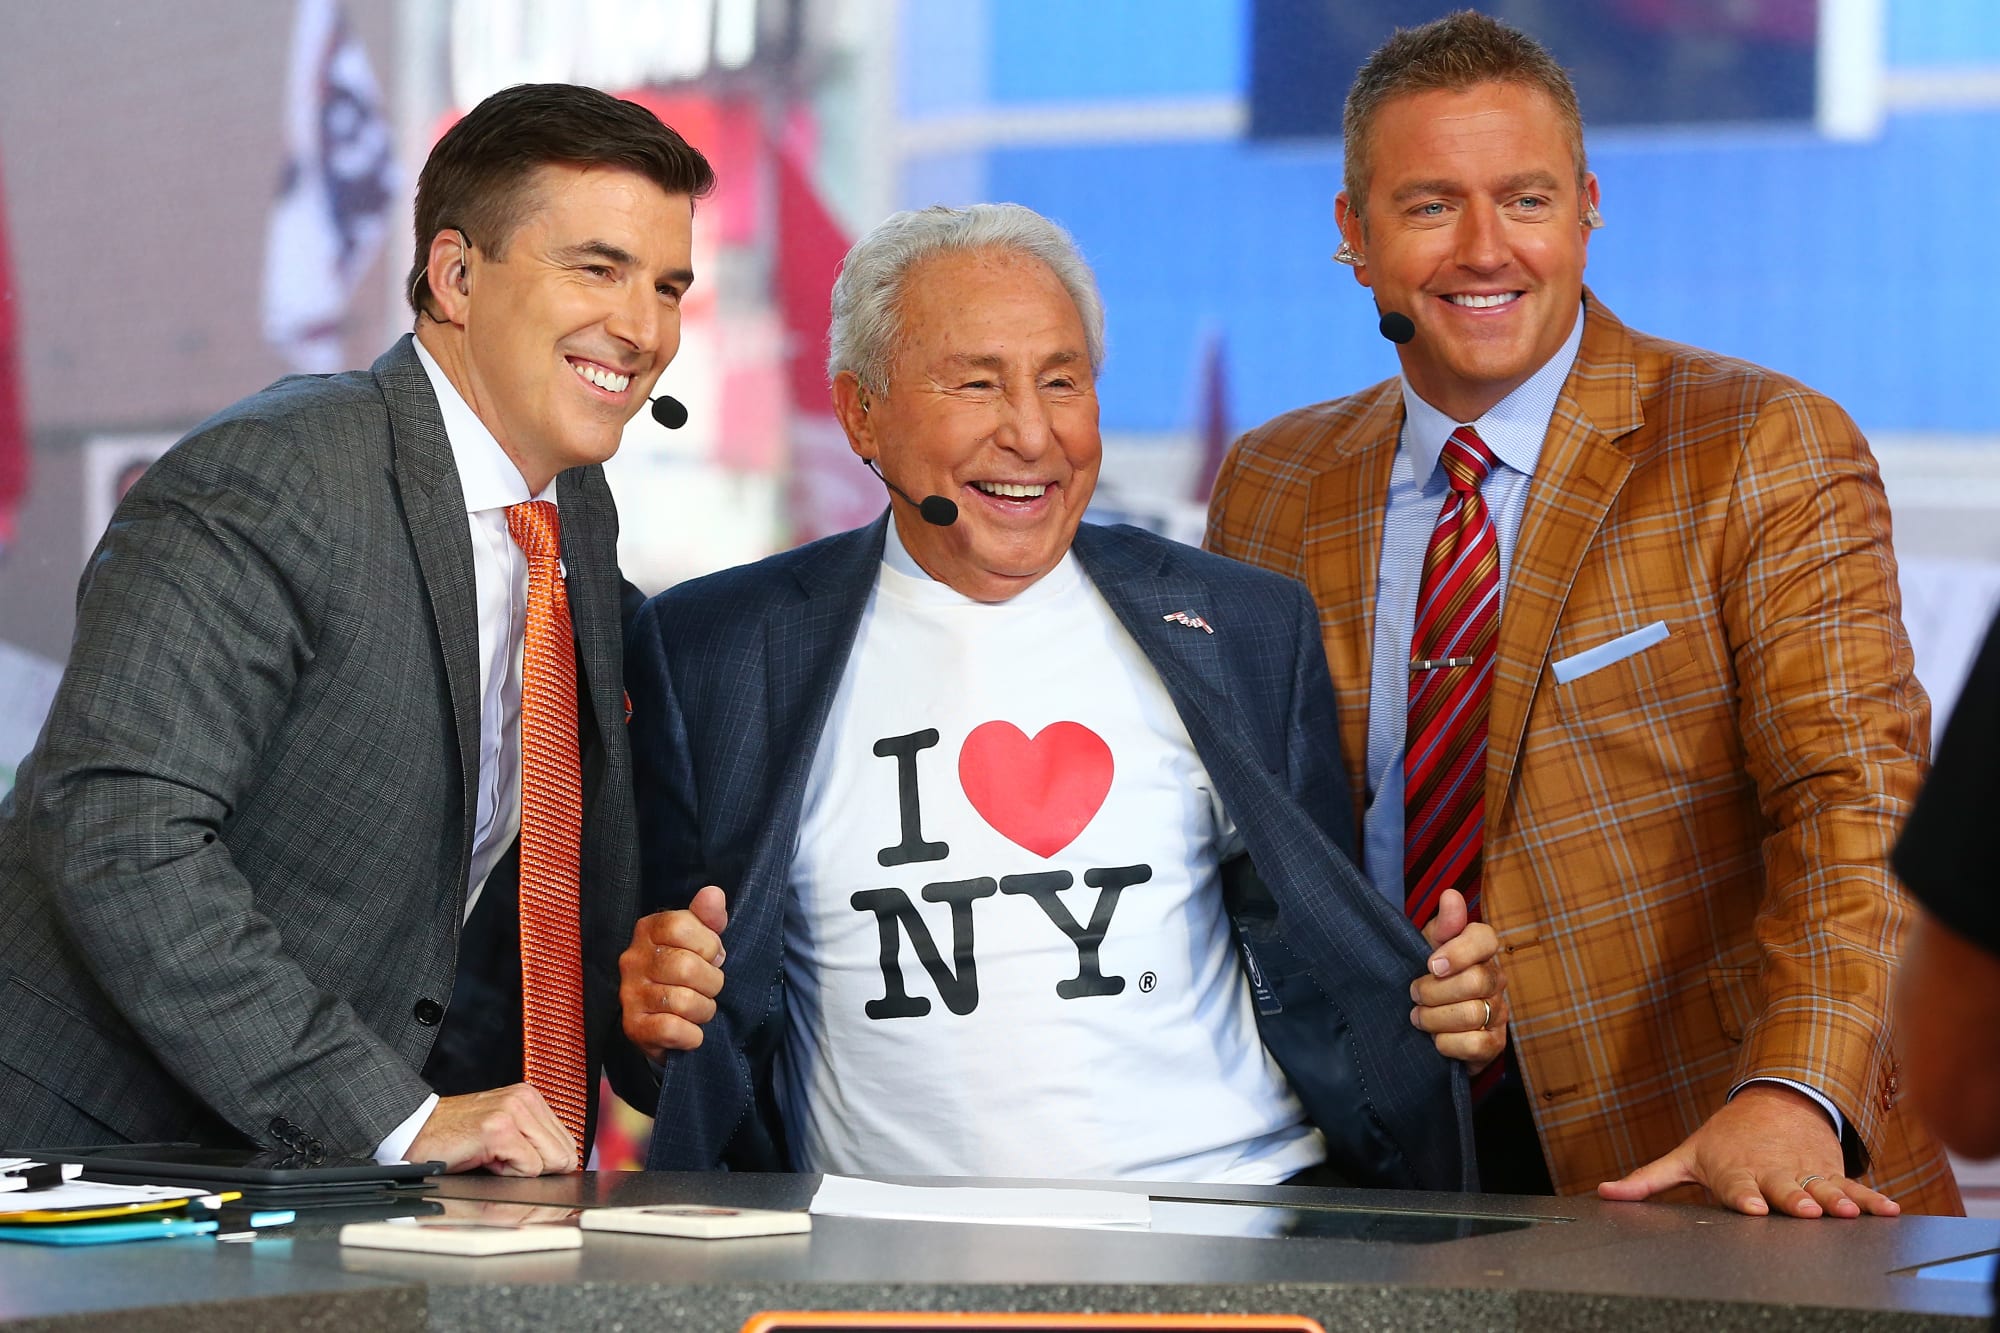 College Football: Who could replace Lee Corso on College GameDay?